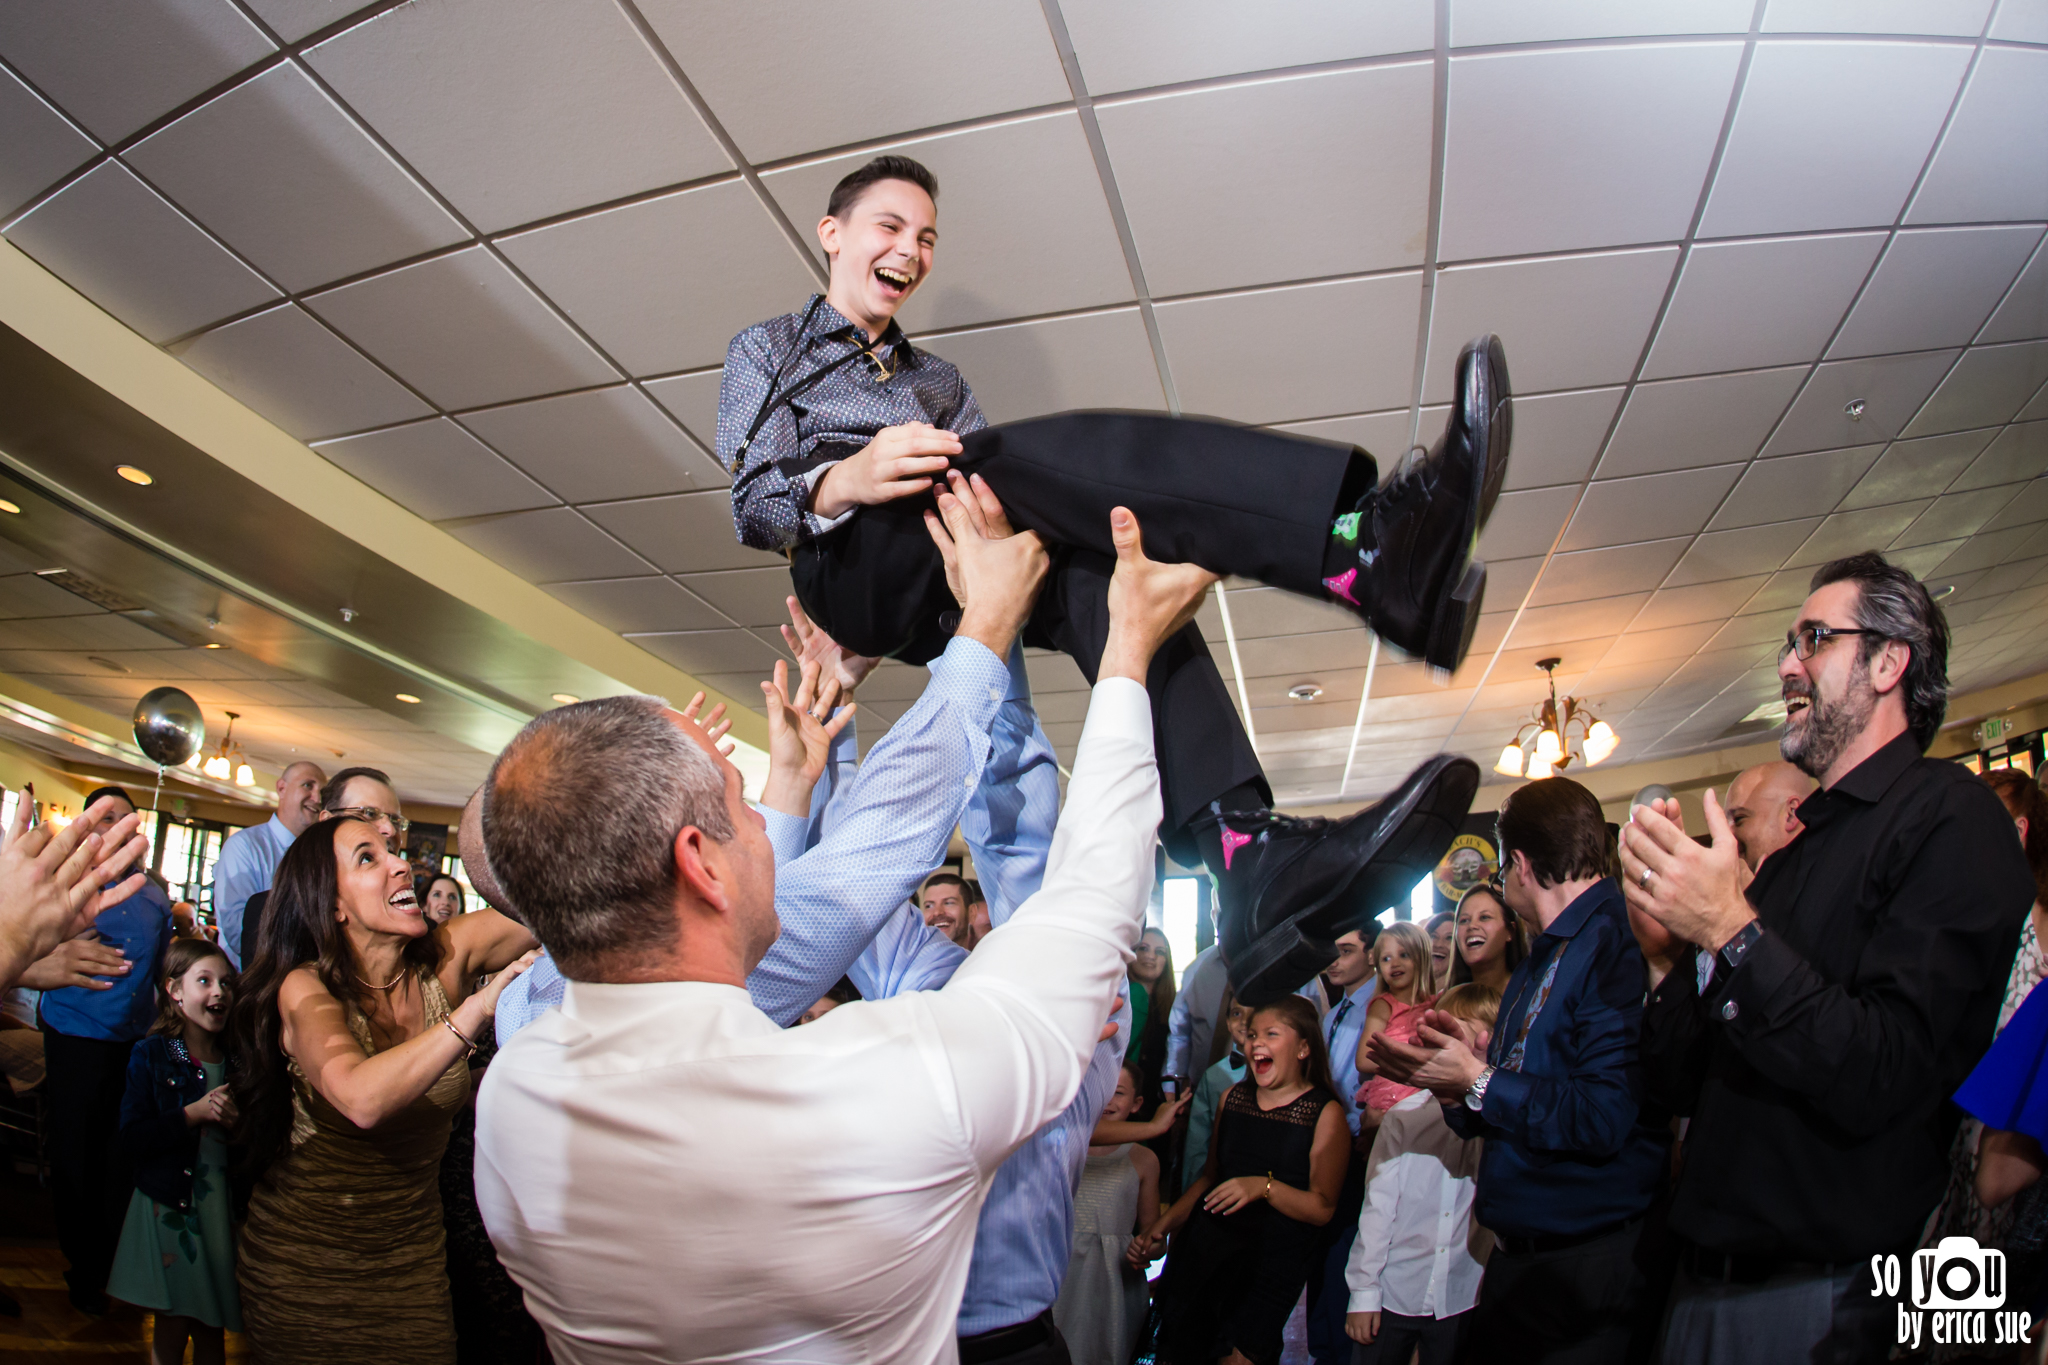 bar-mitzvah-pembroke-lakes-golf-country-club-mitzvah-photography-so-you-by-erica-sue-26.jpg